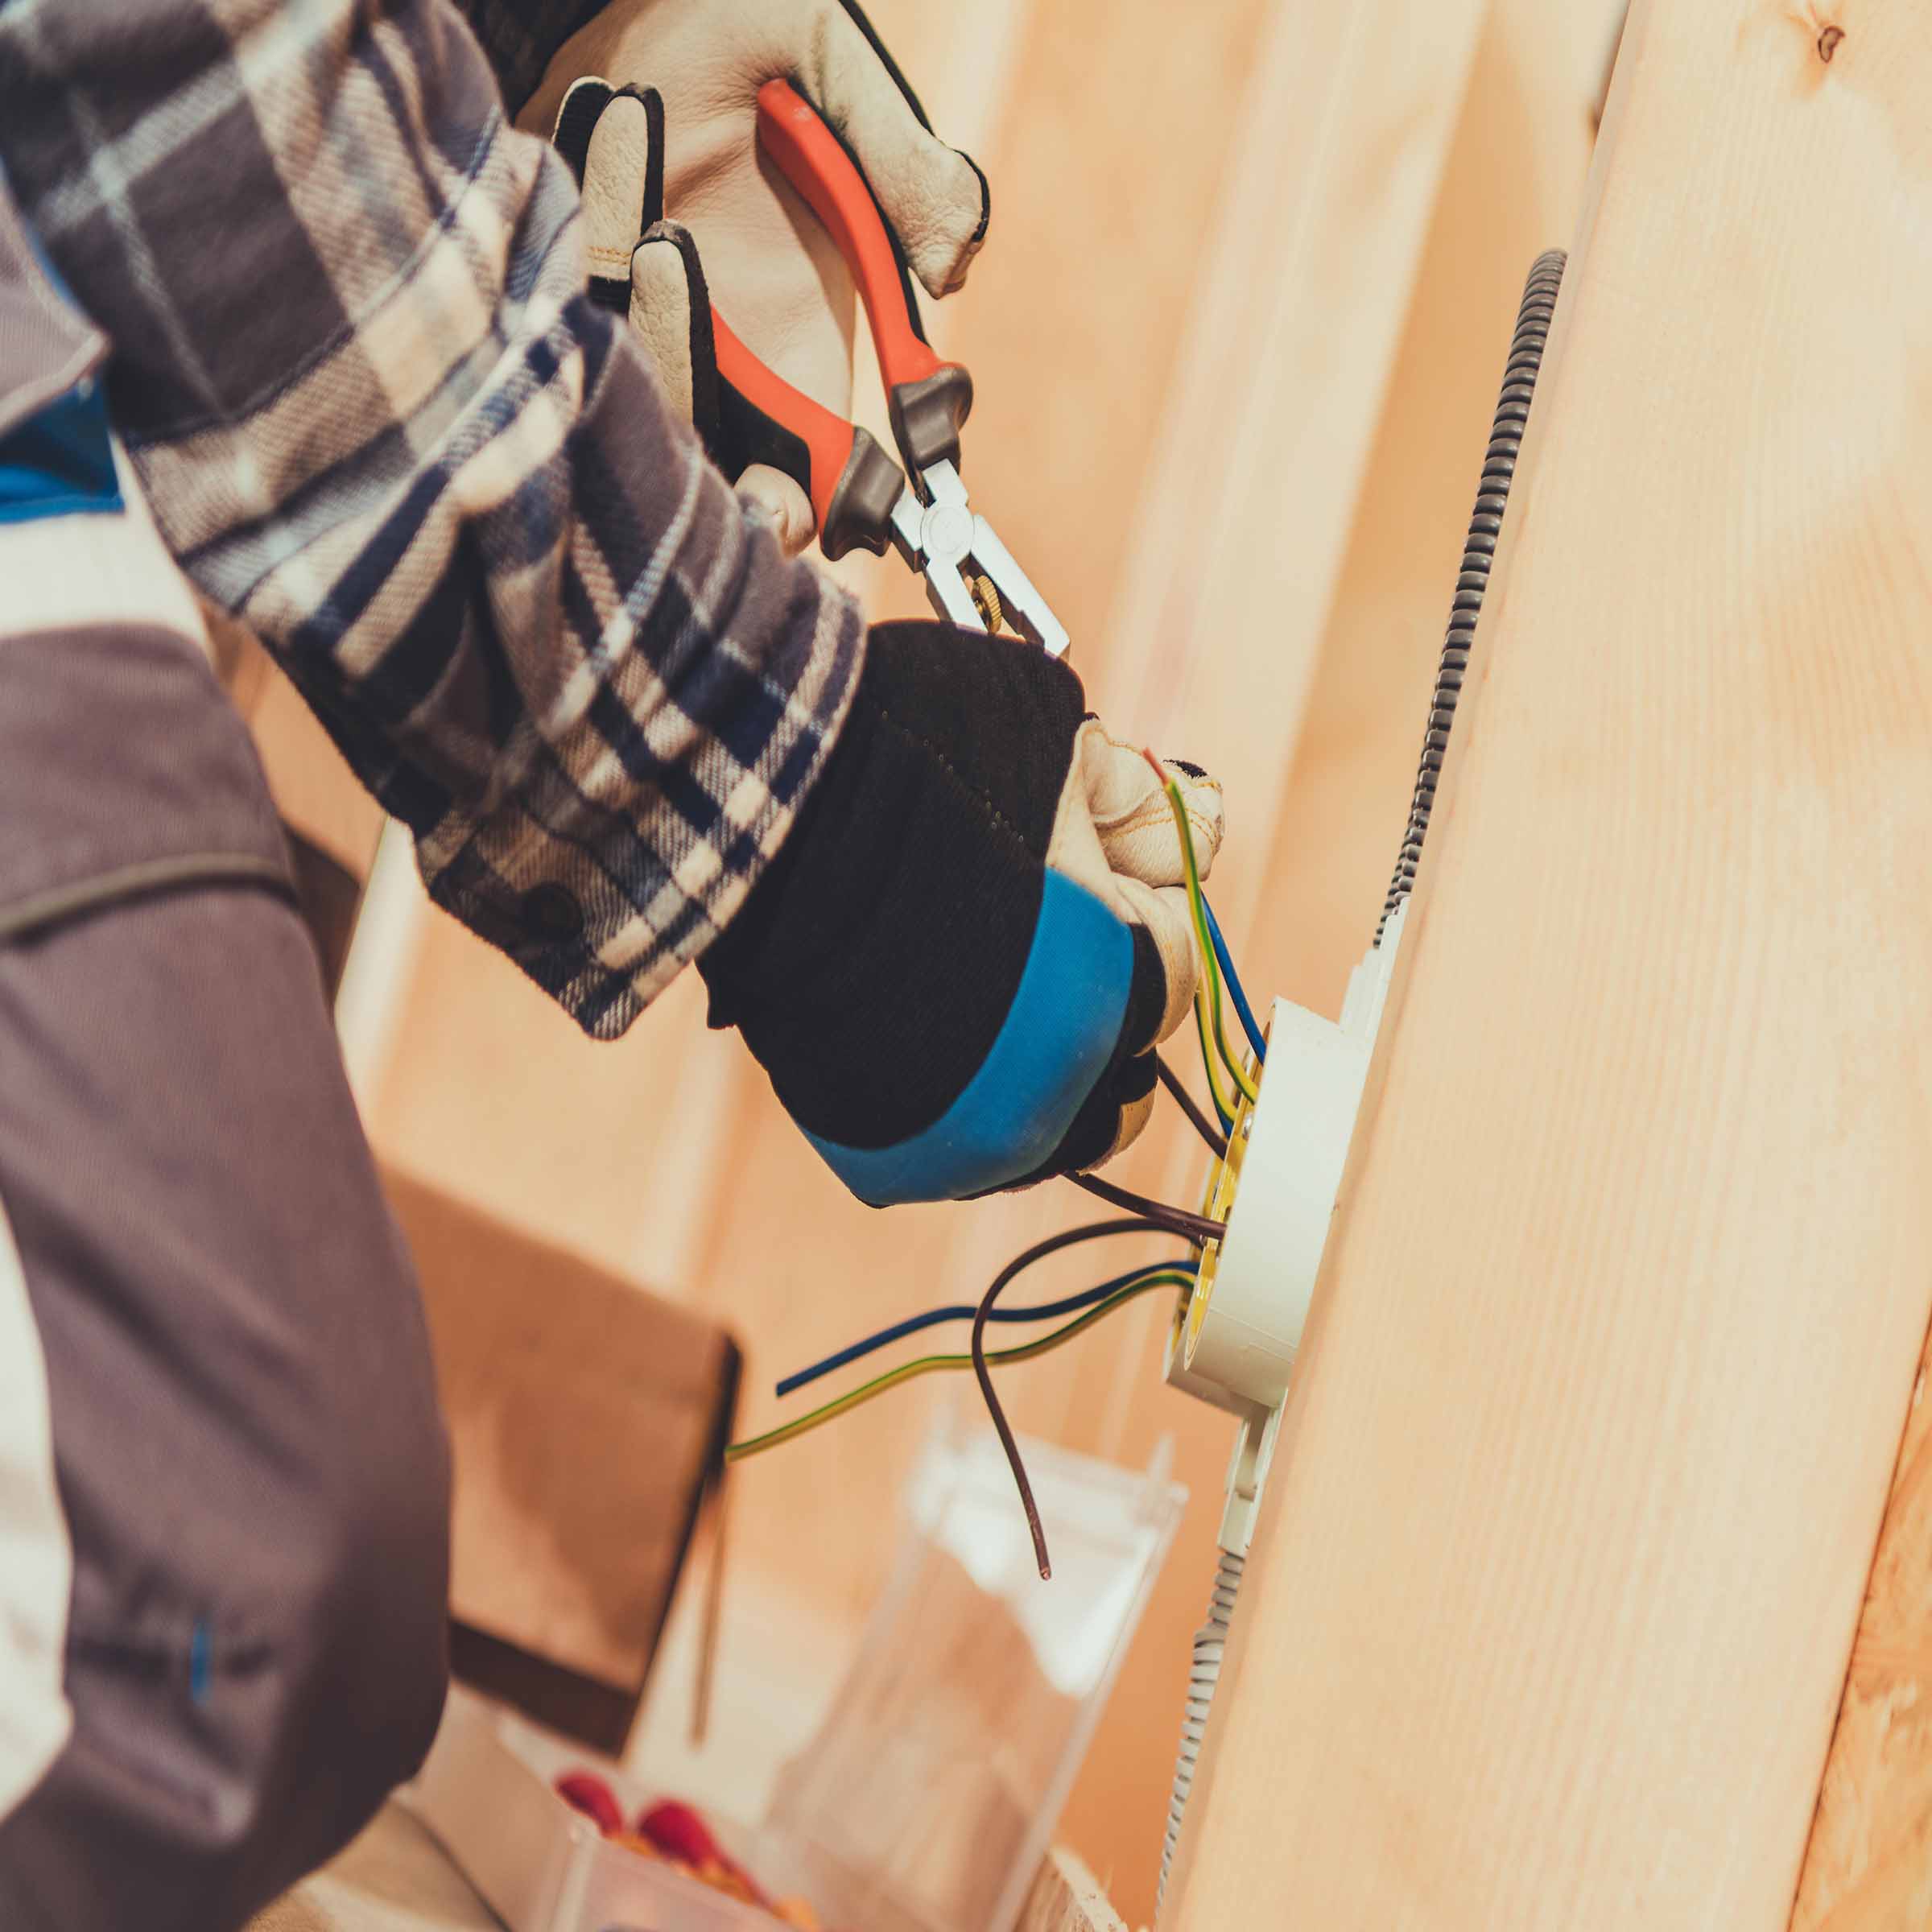 How Much Does An Electrician Earn In Australia